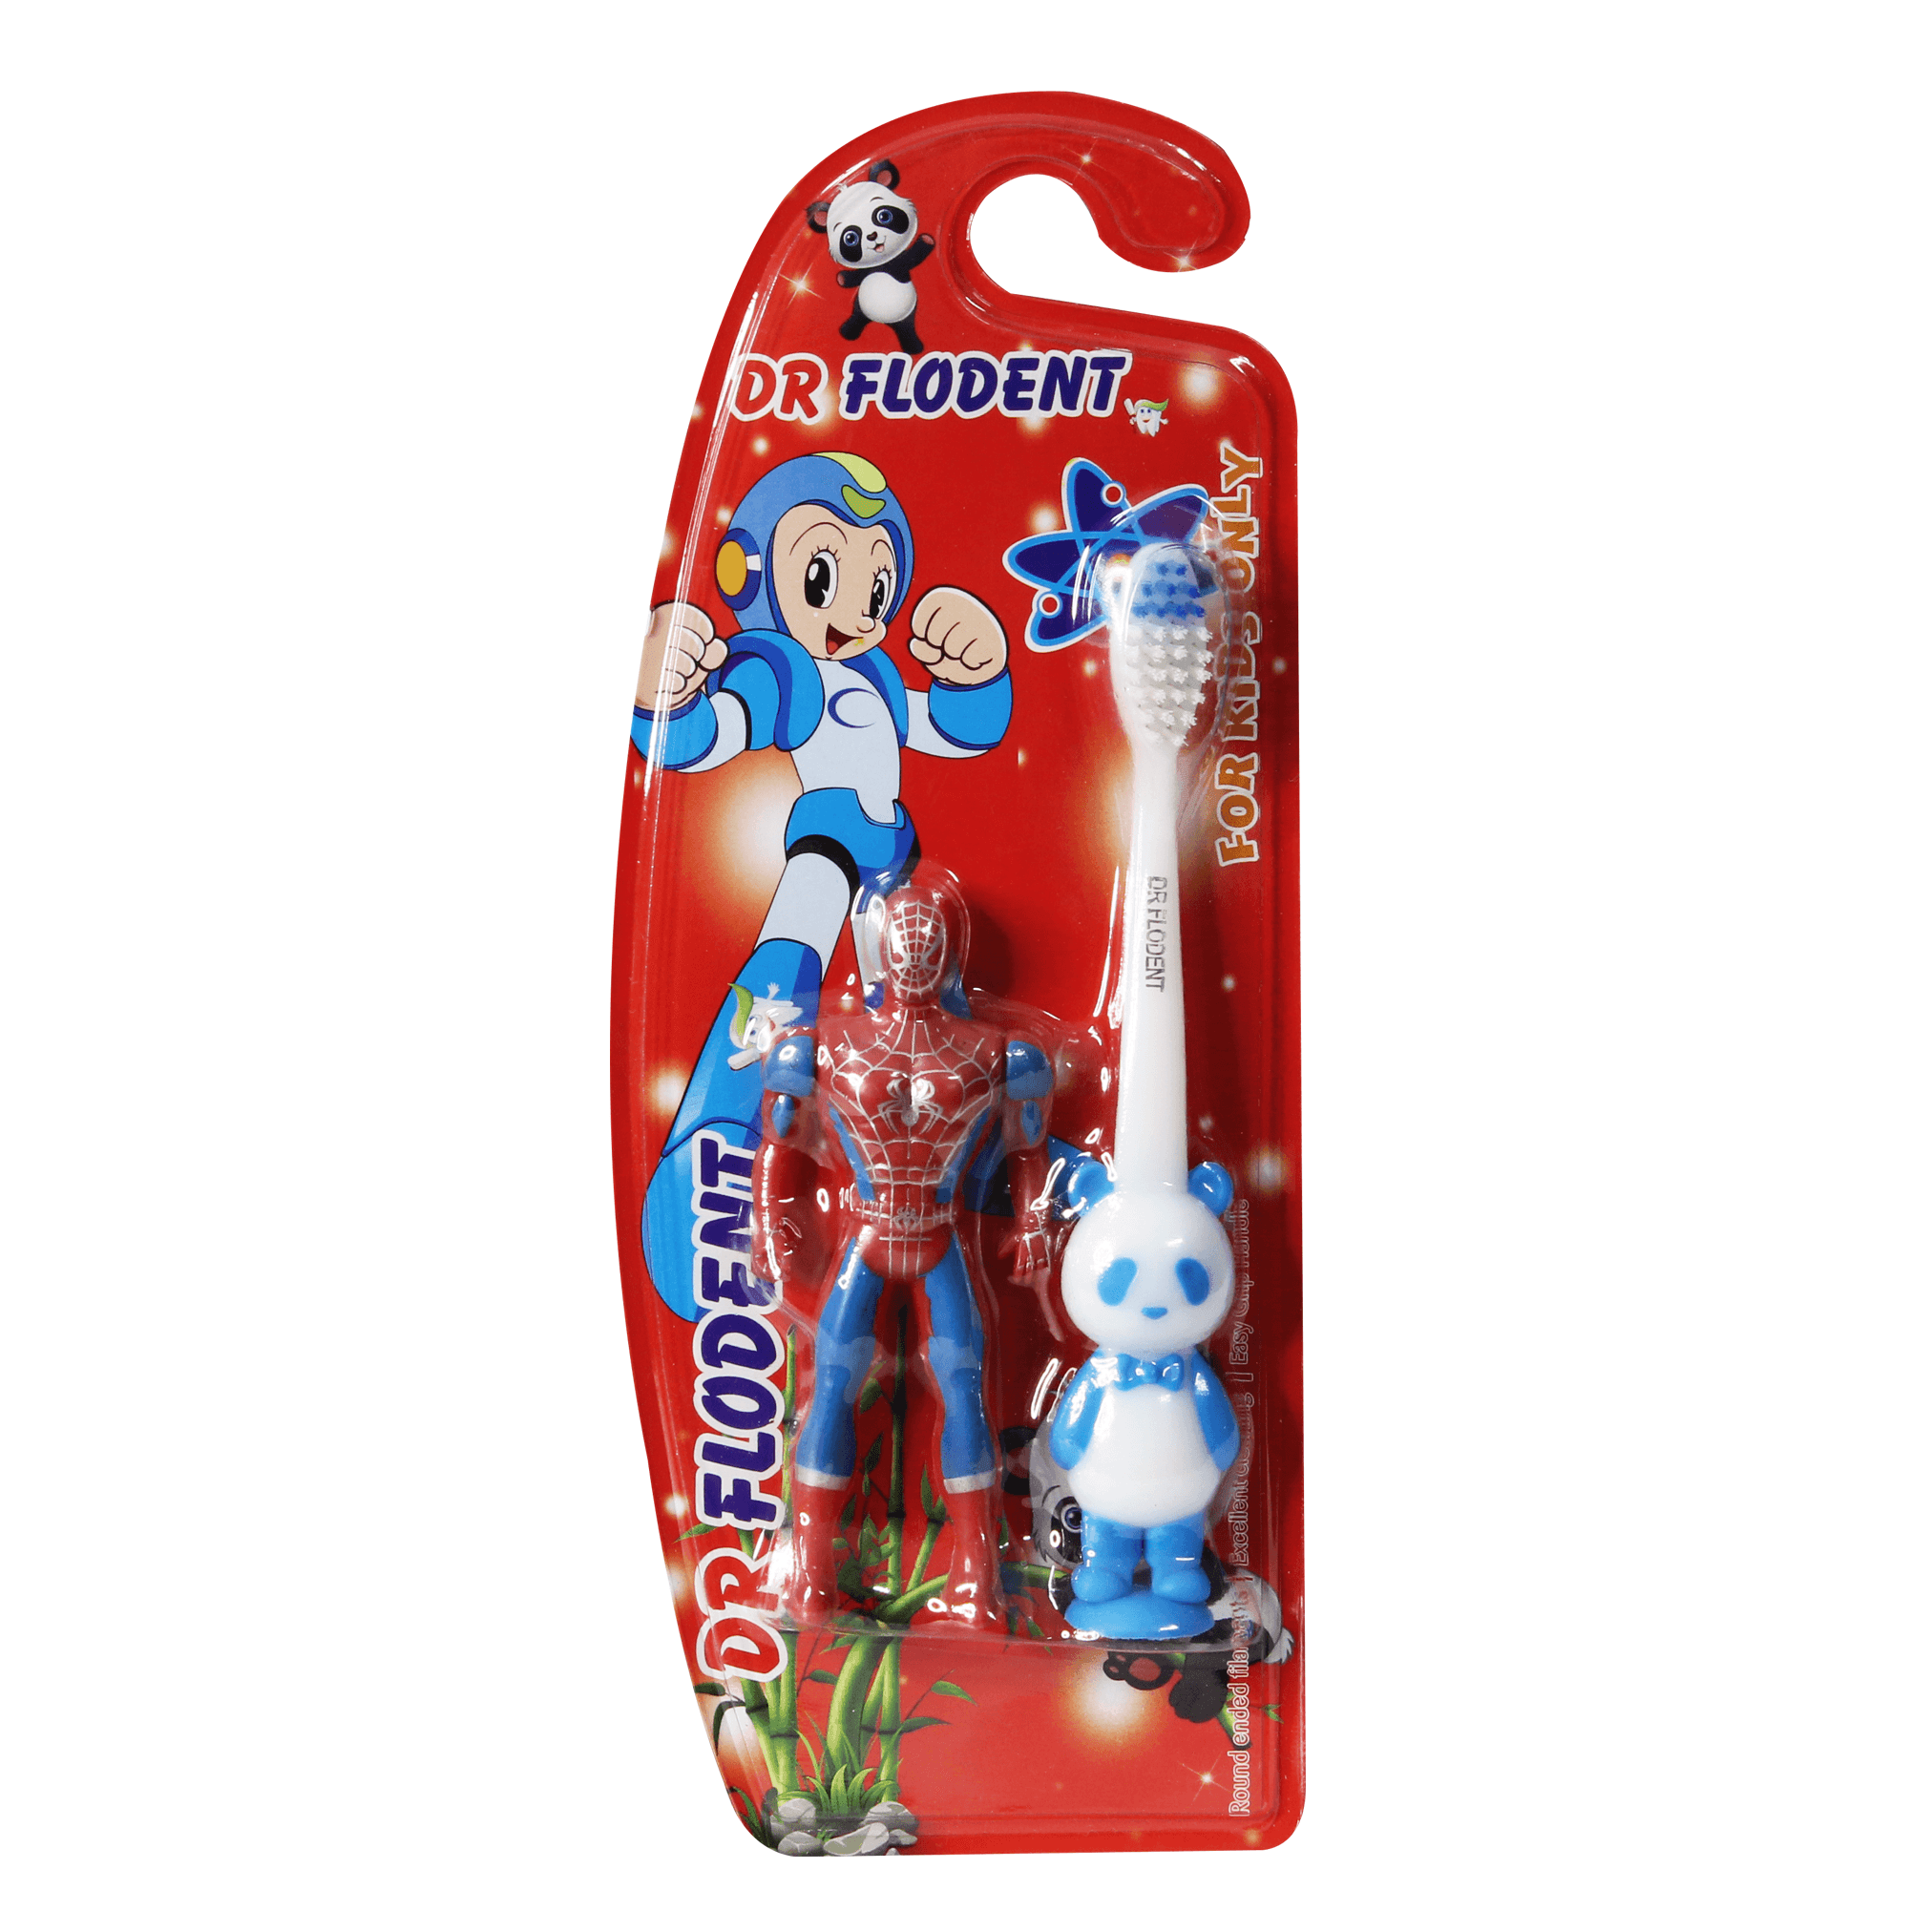 Dr Flodent Kids Toothbrush Extra Soft With Spiderman Toy - BumbleToys - 2-4 Years, 5-7 Years, Baby Saftey & Health, Boys, Toothbrush